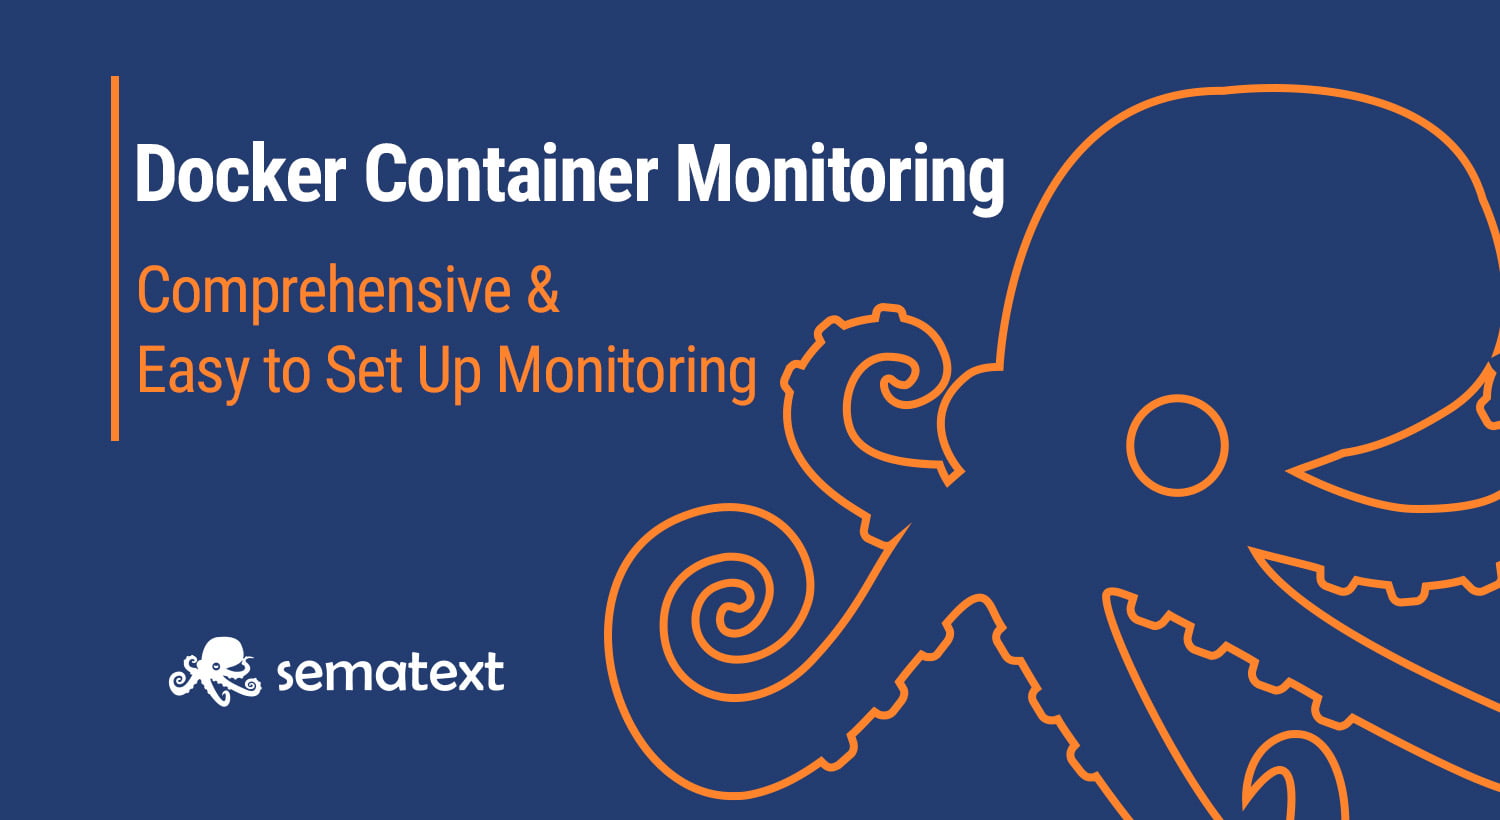 Docker Container Monitoring with Sematext